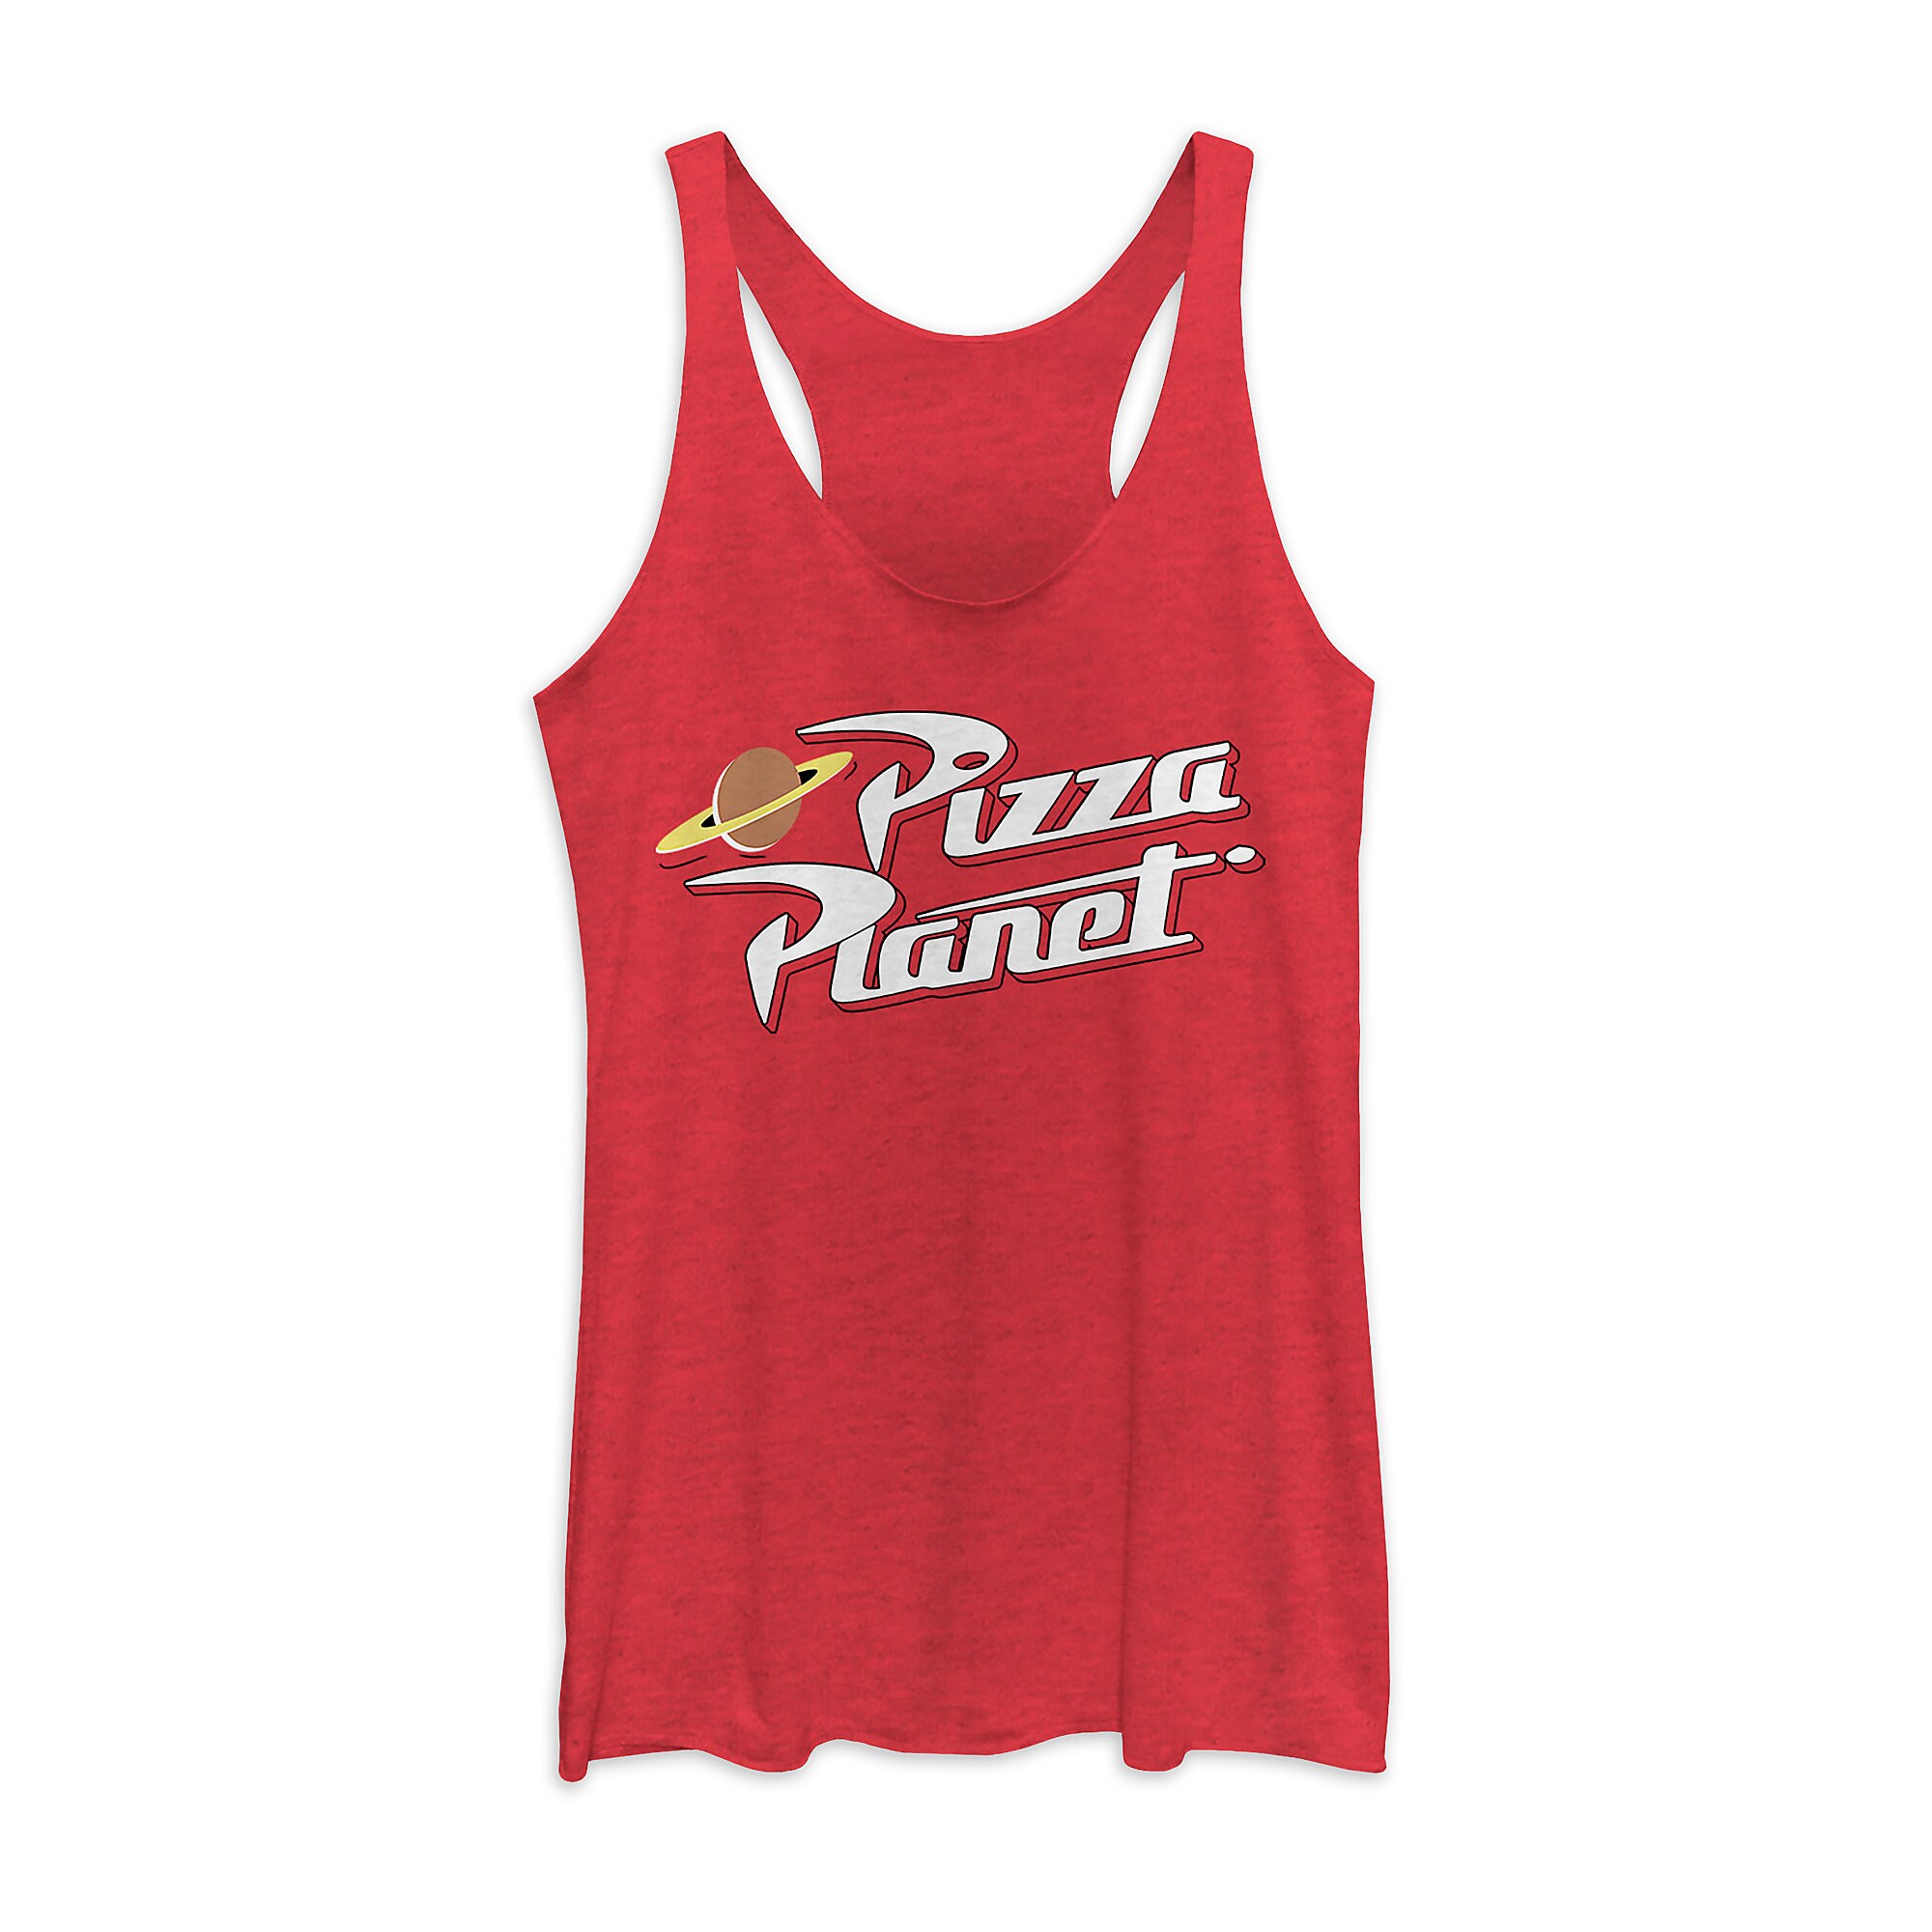 Pizza Planet Tank Top for Juniors - Toy Story